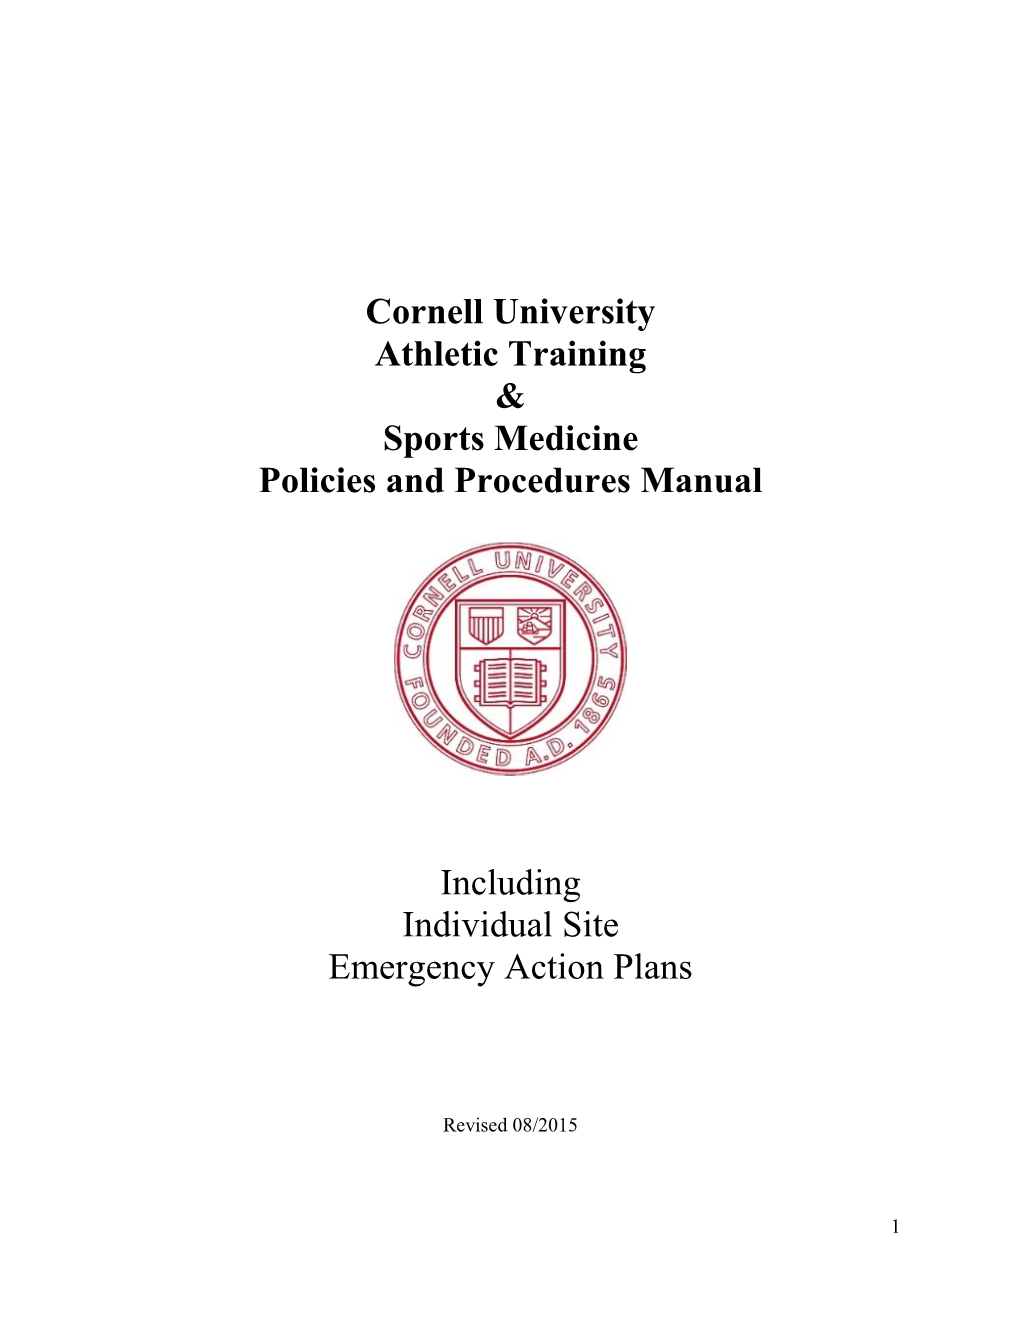 Cornell University Athletic Training & Sports Medicine Policies And